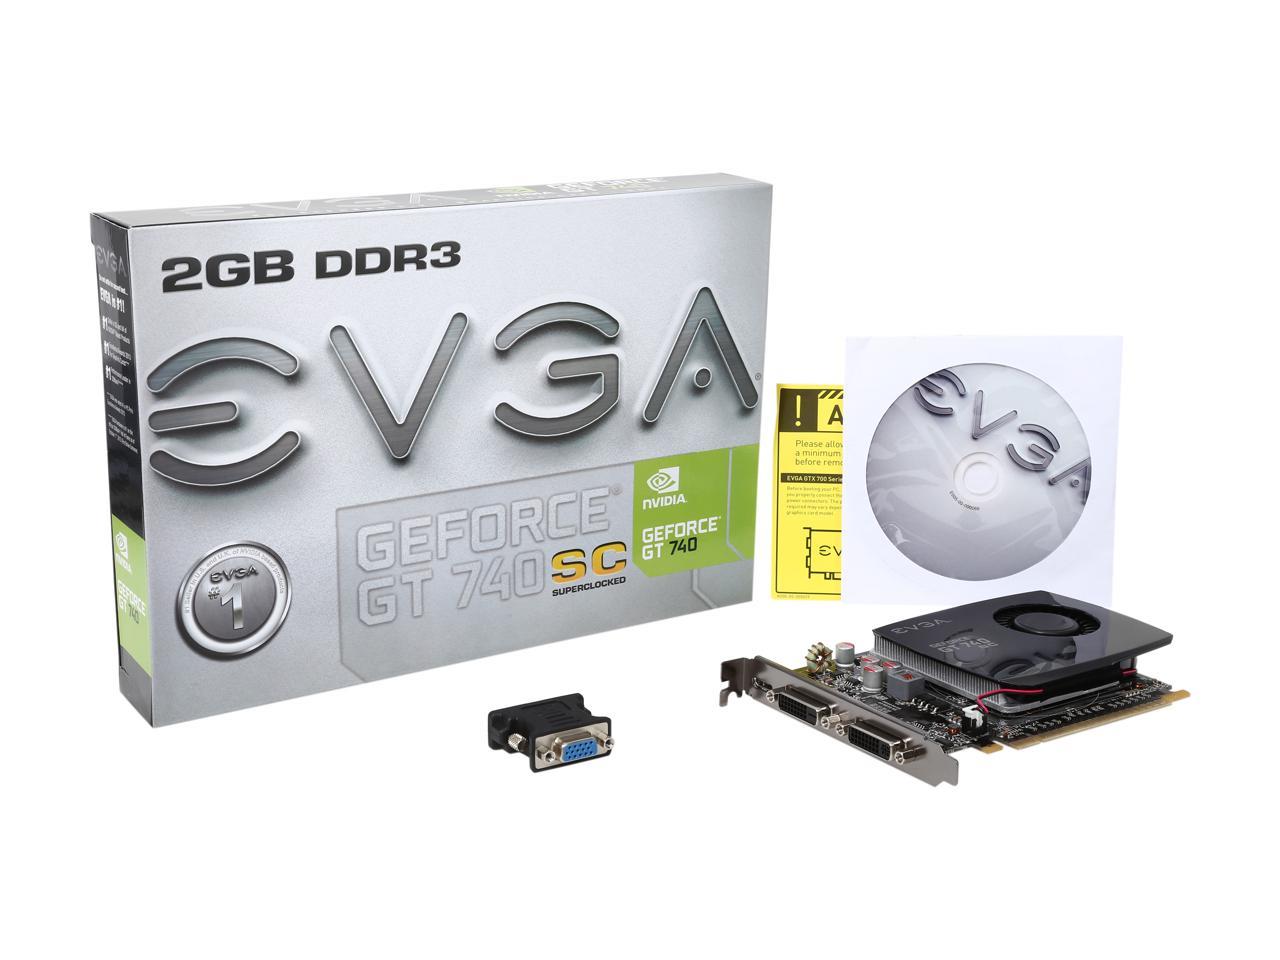 EVGA GeForce GT 740 Superclocked Dual Slot 2GB DDR3 Graphics Cards  02G-P4-2743-KR